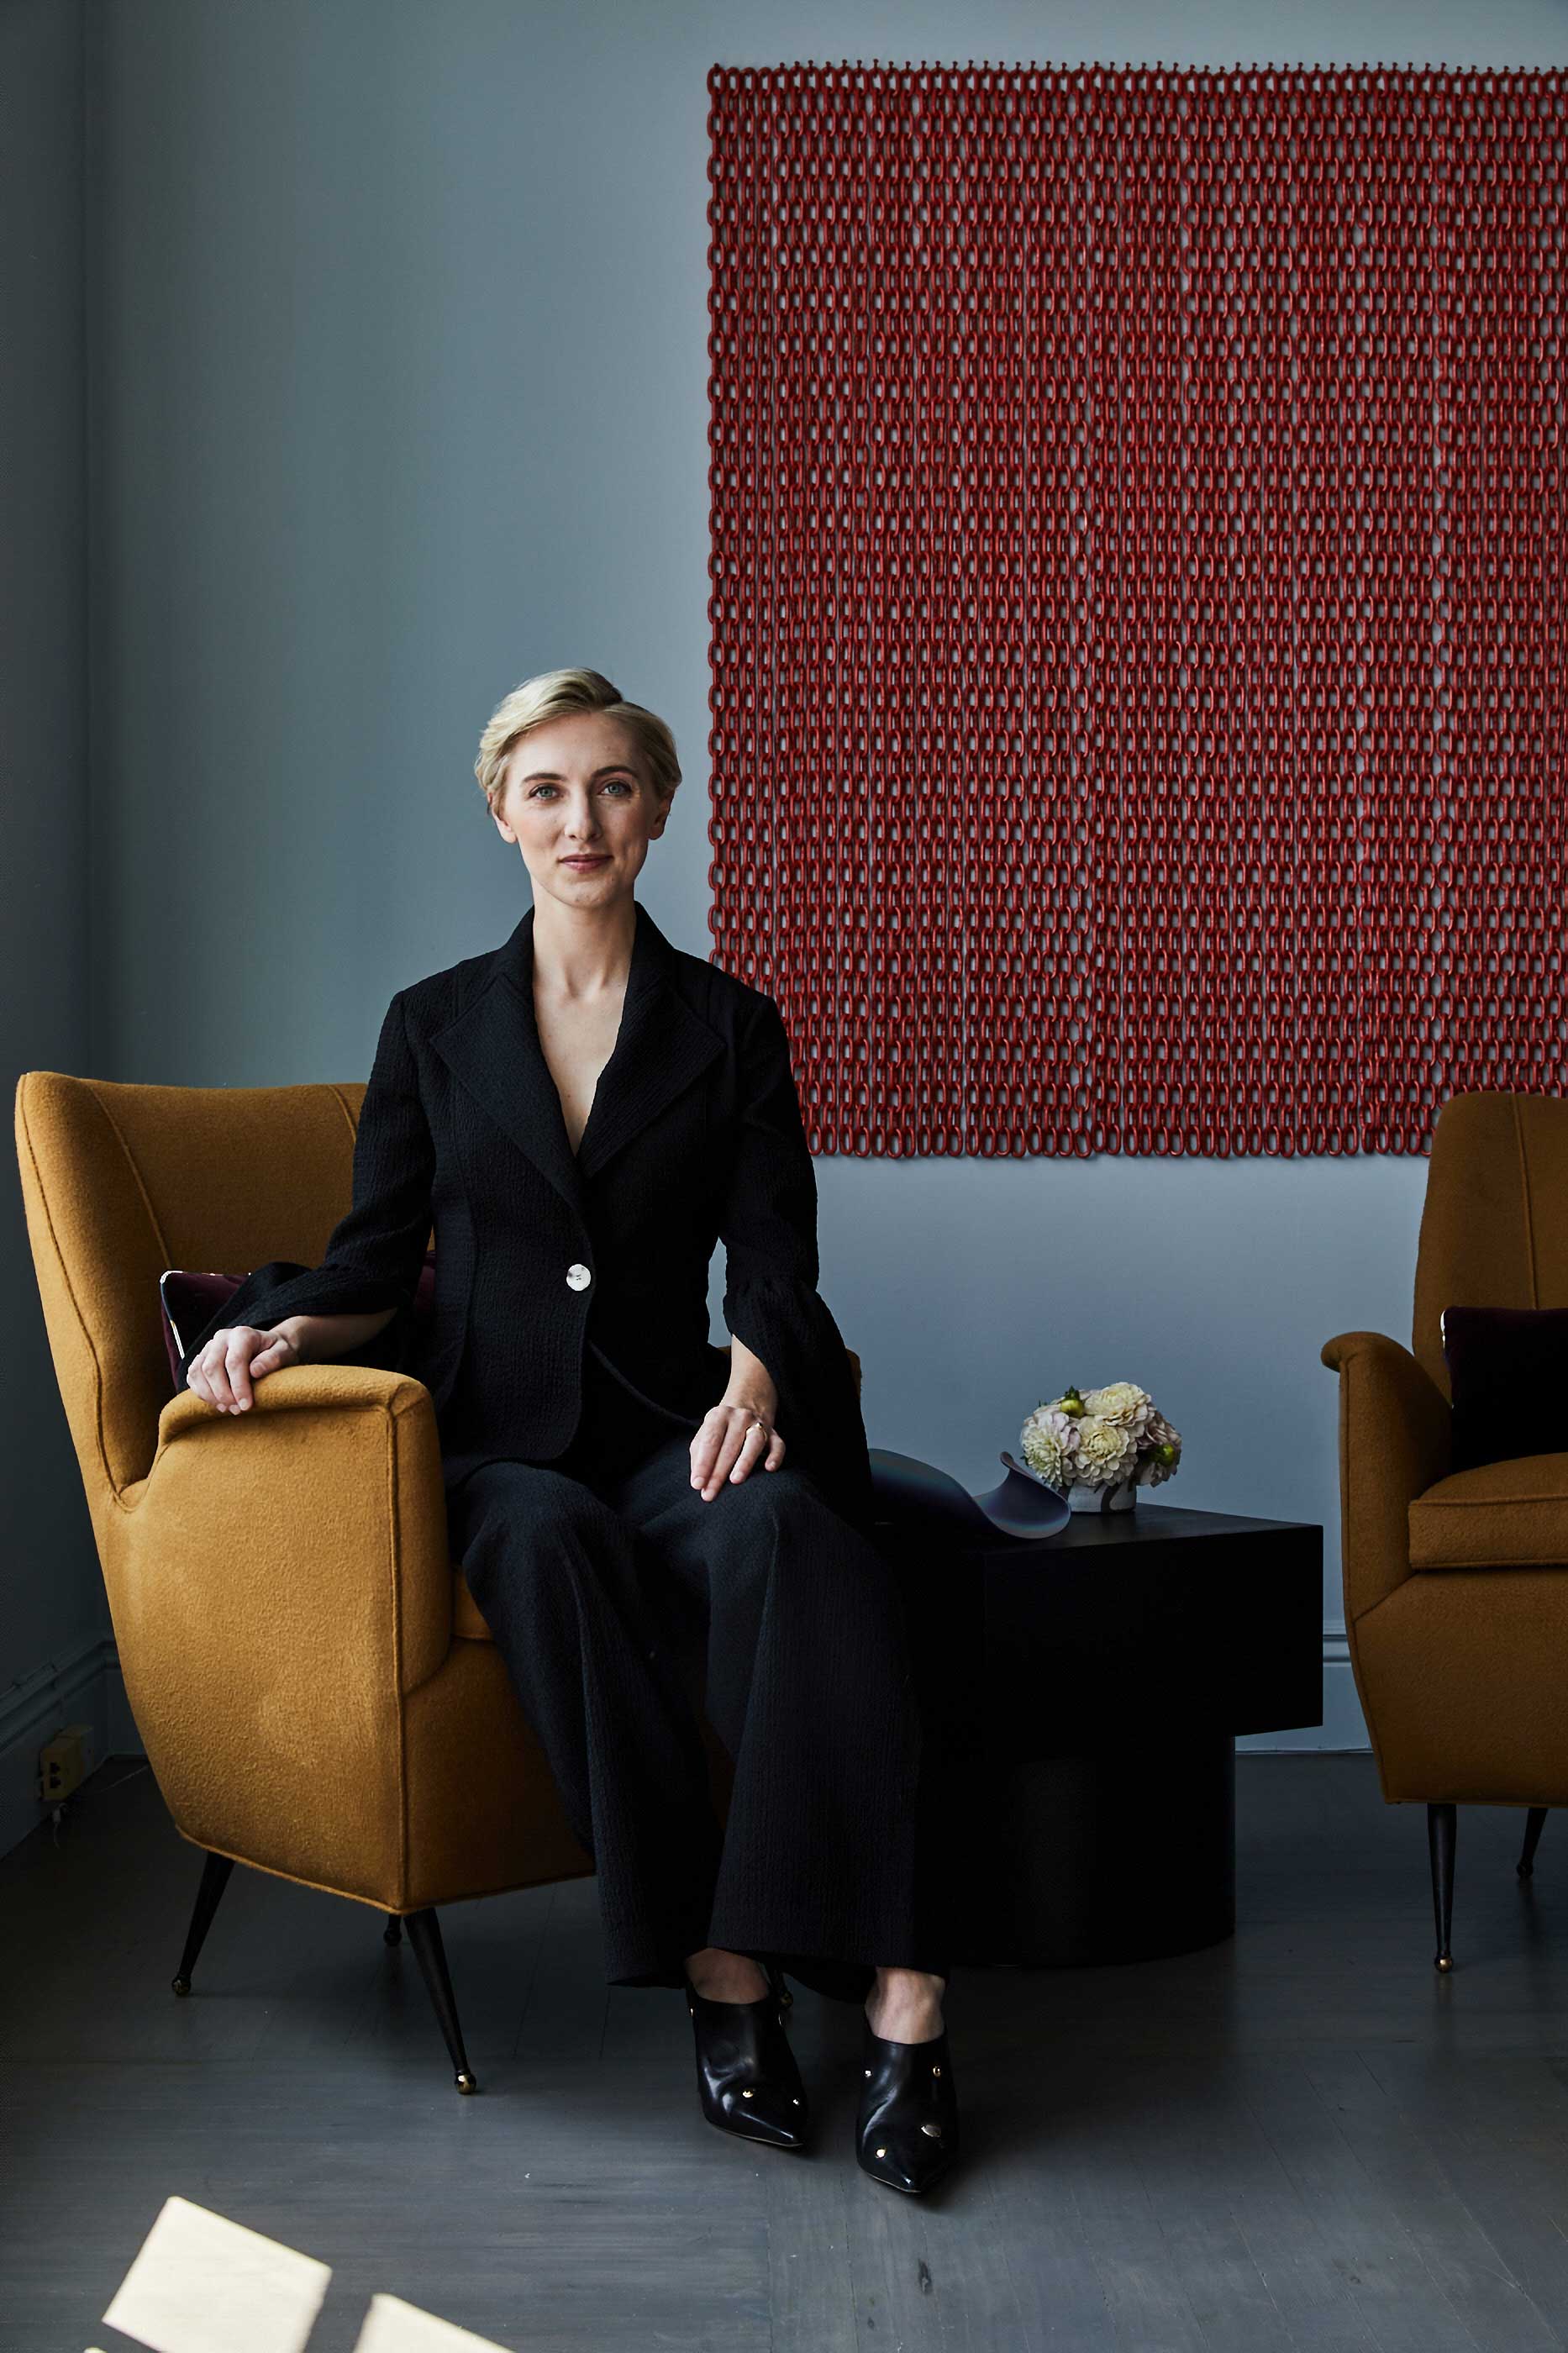 A woman dressed in black sitting on a dark yellow lounge chair in front of a red artwork hanging on a pale blue wall